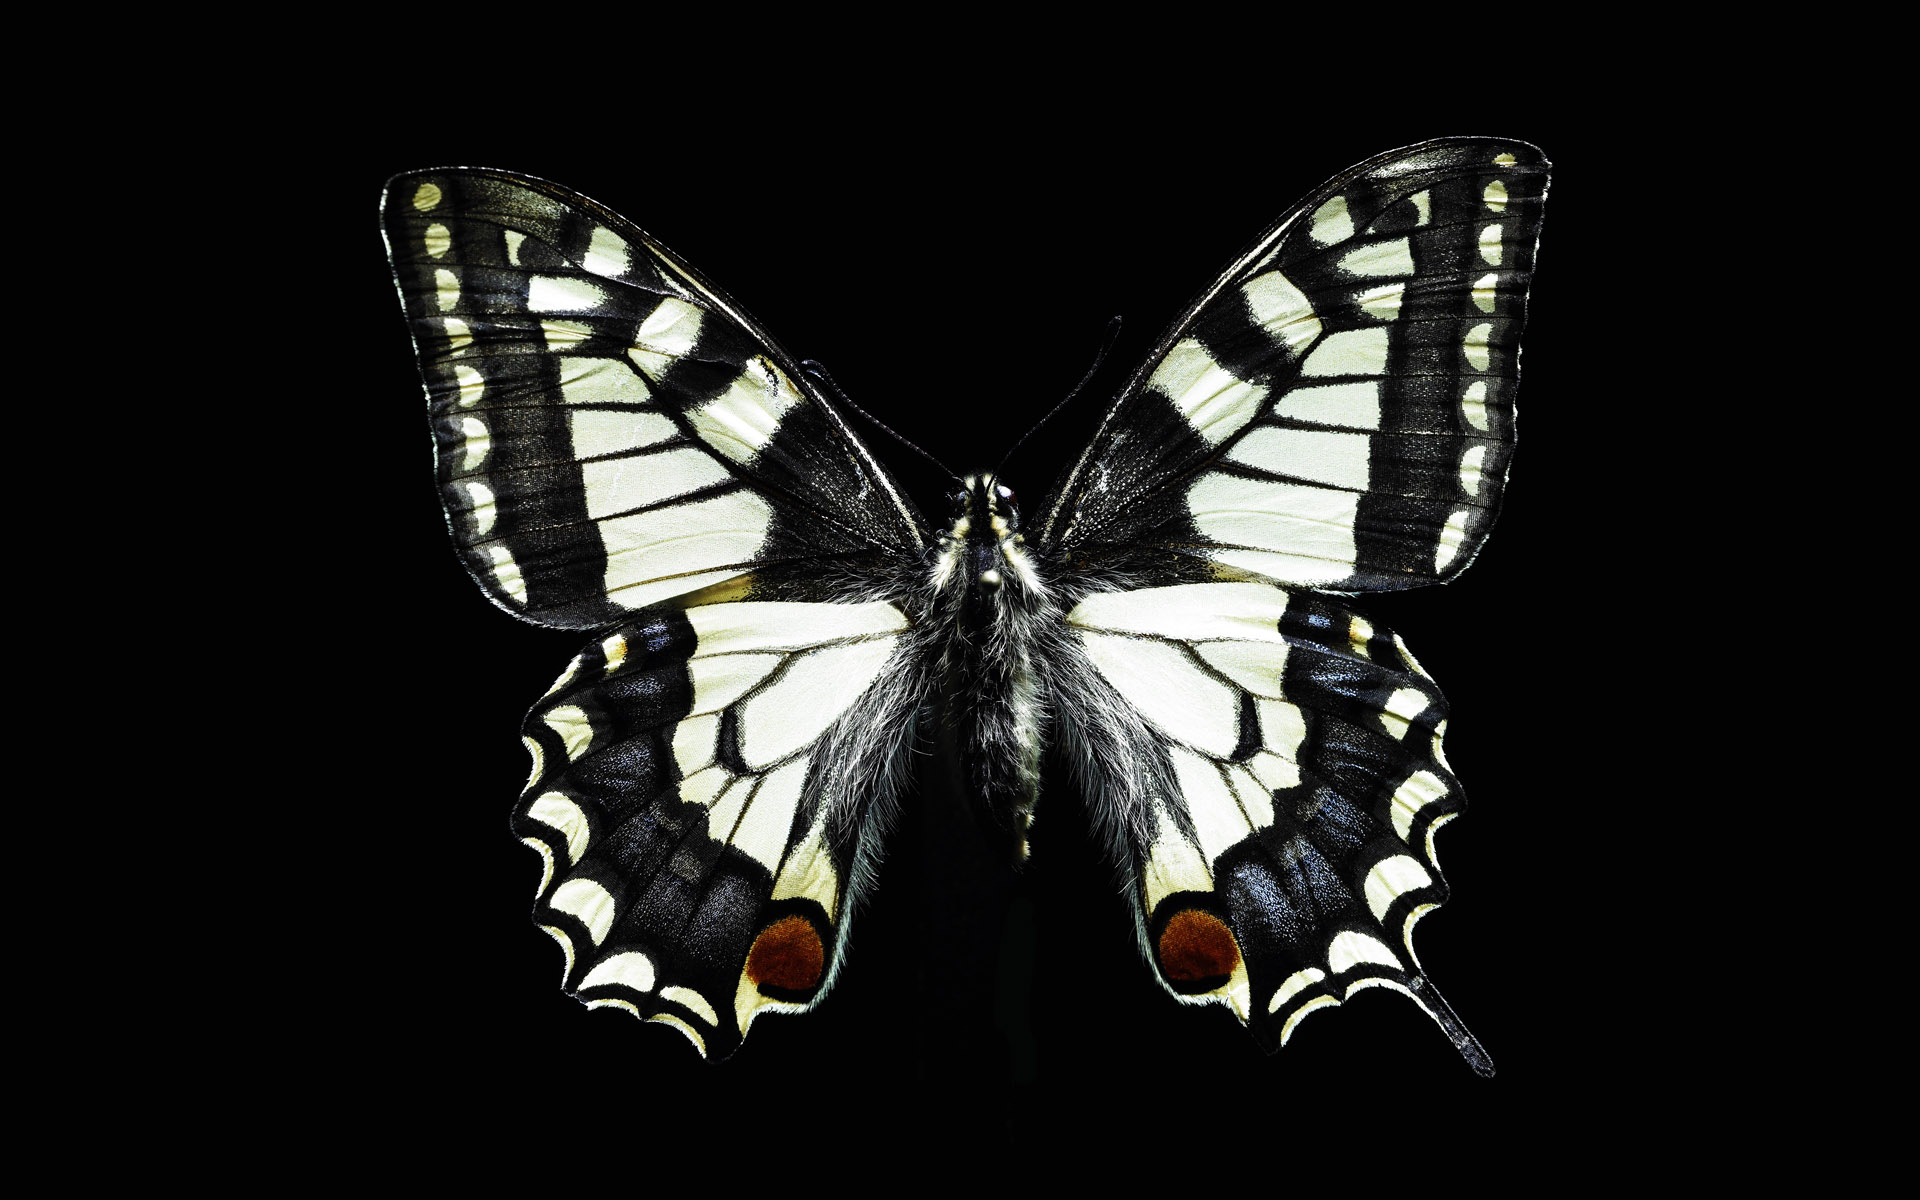 Black and white butterfly wallpapers and images - wallpapers 